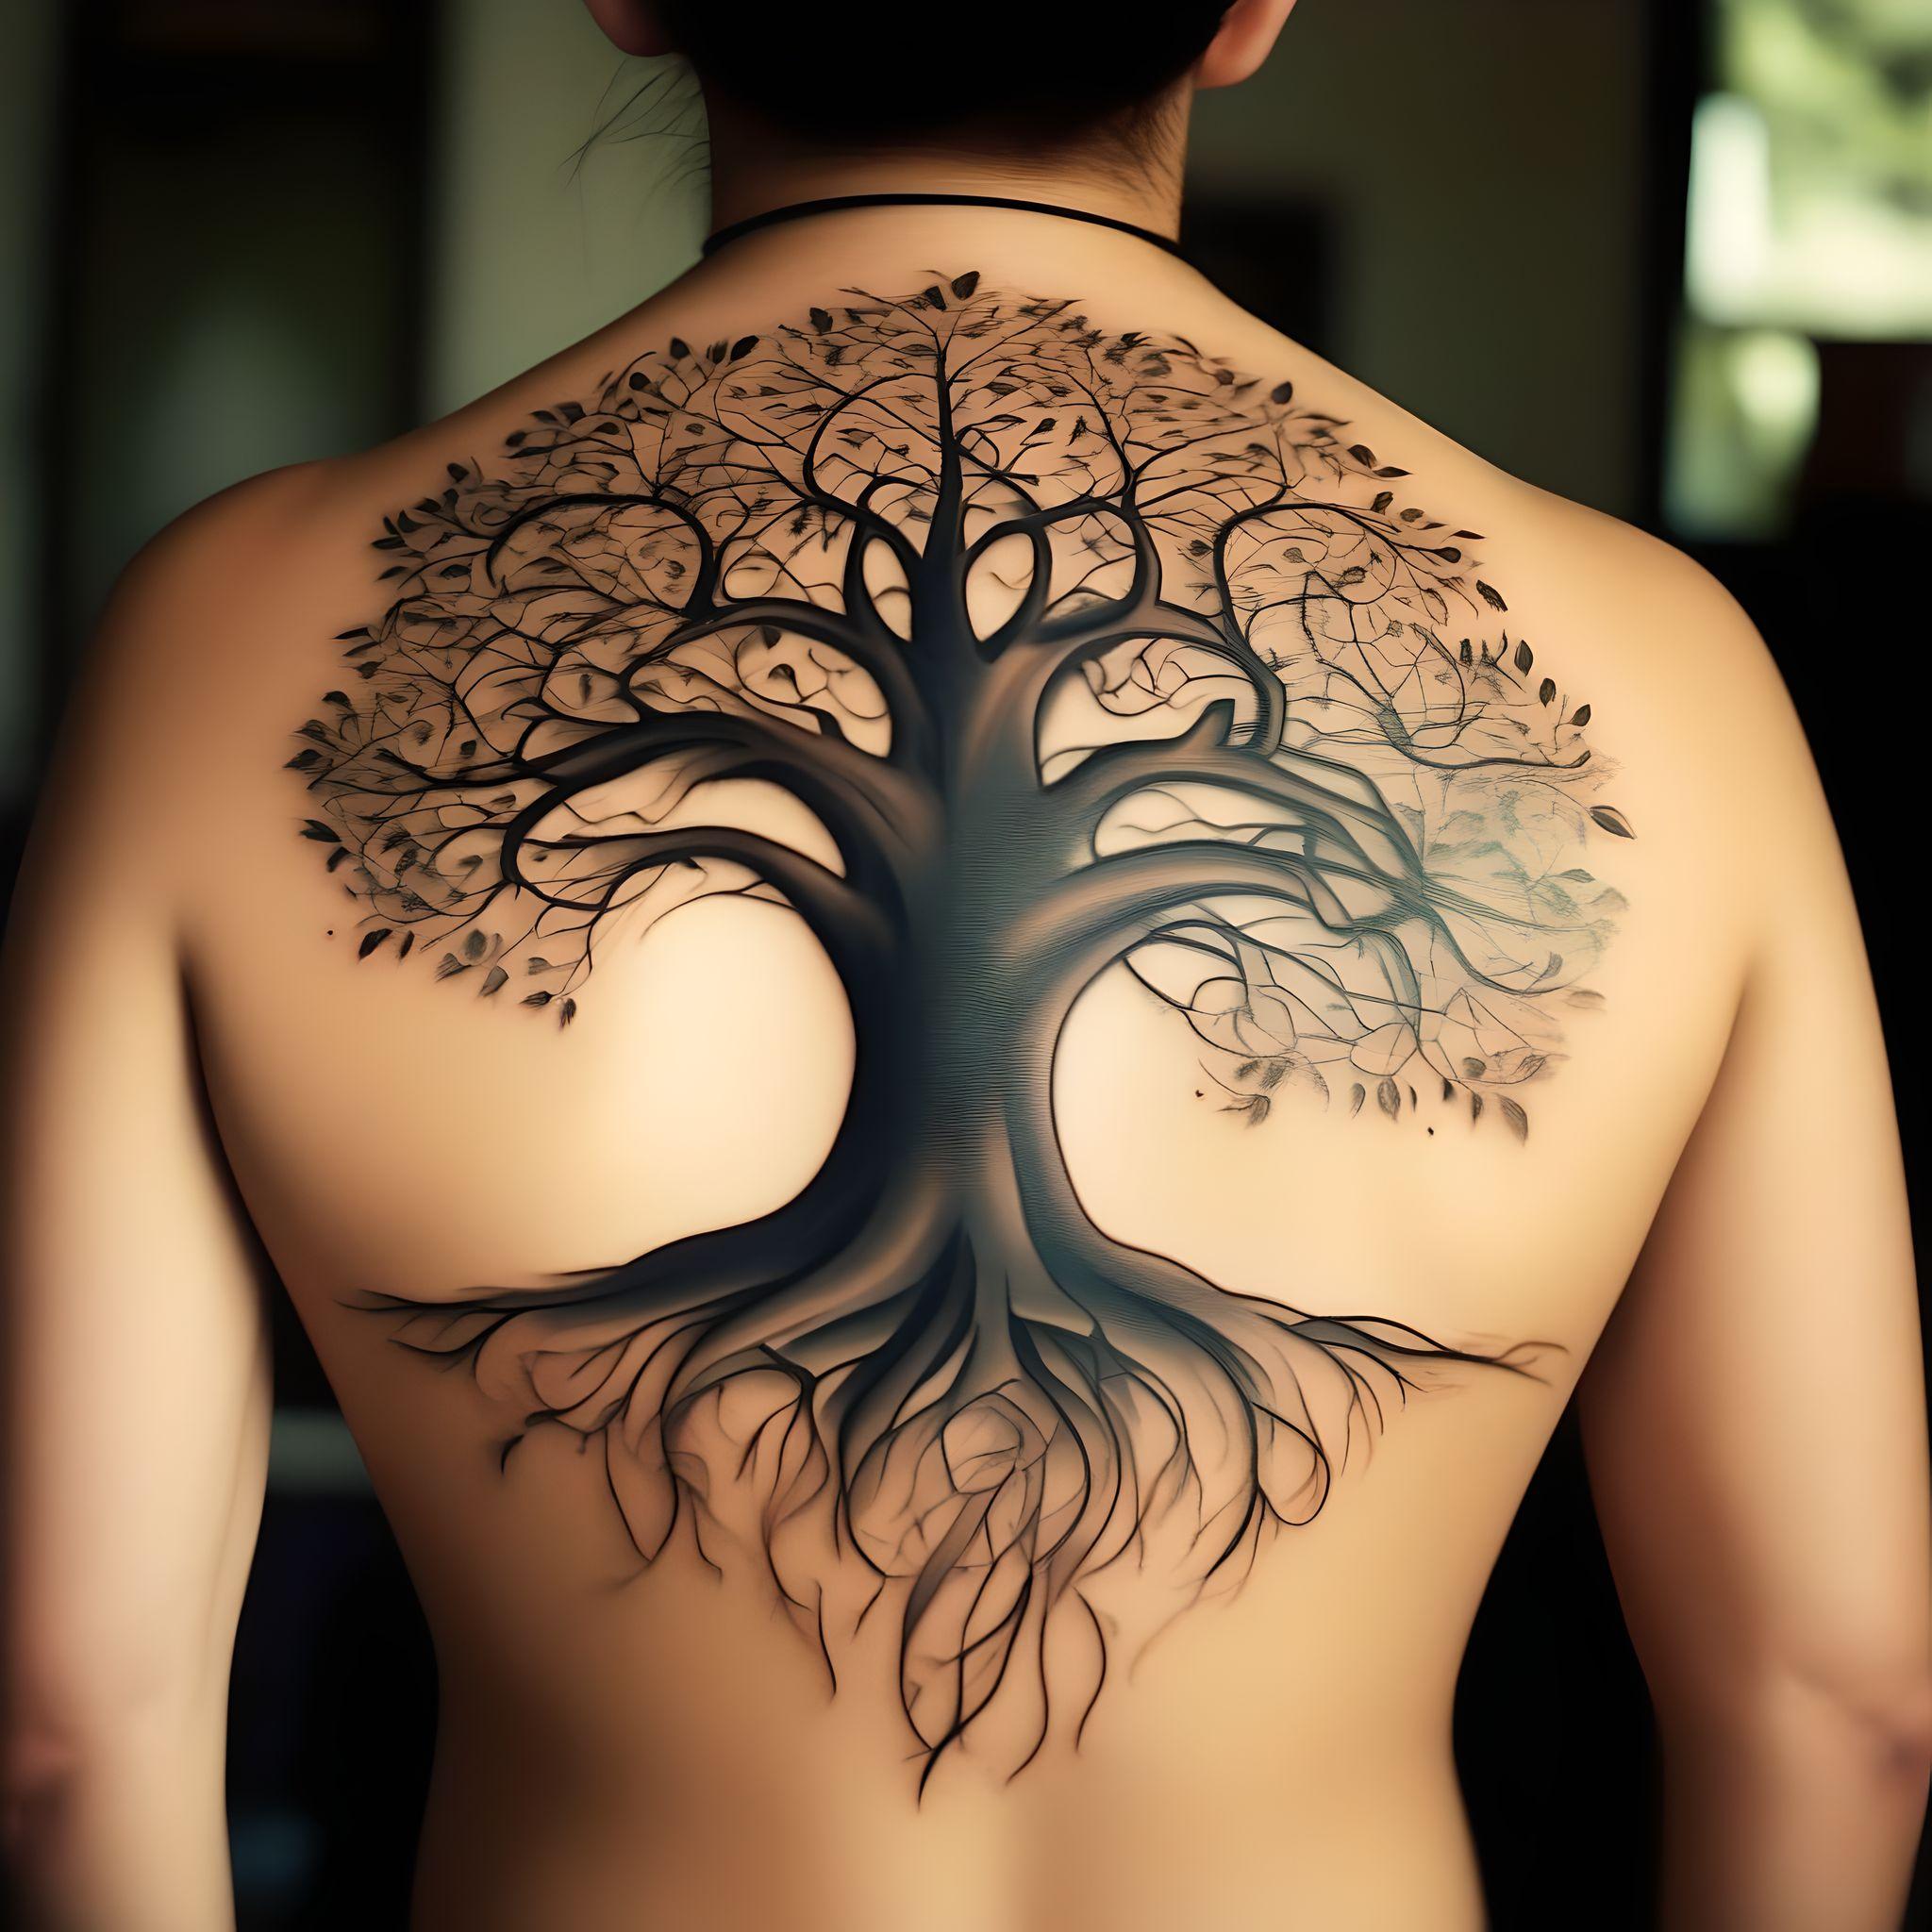 a family tree tattoo design on a mans back